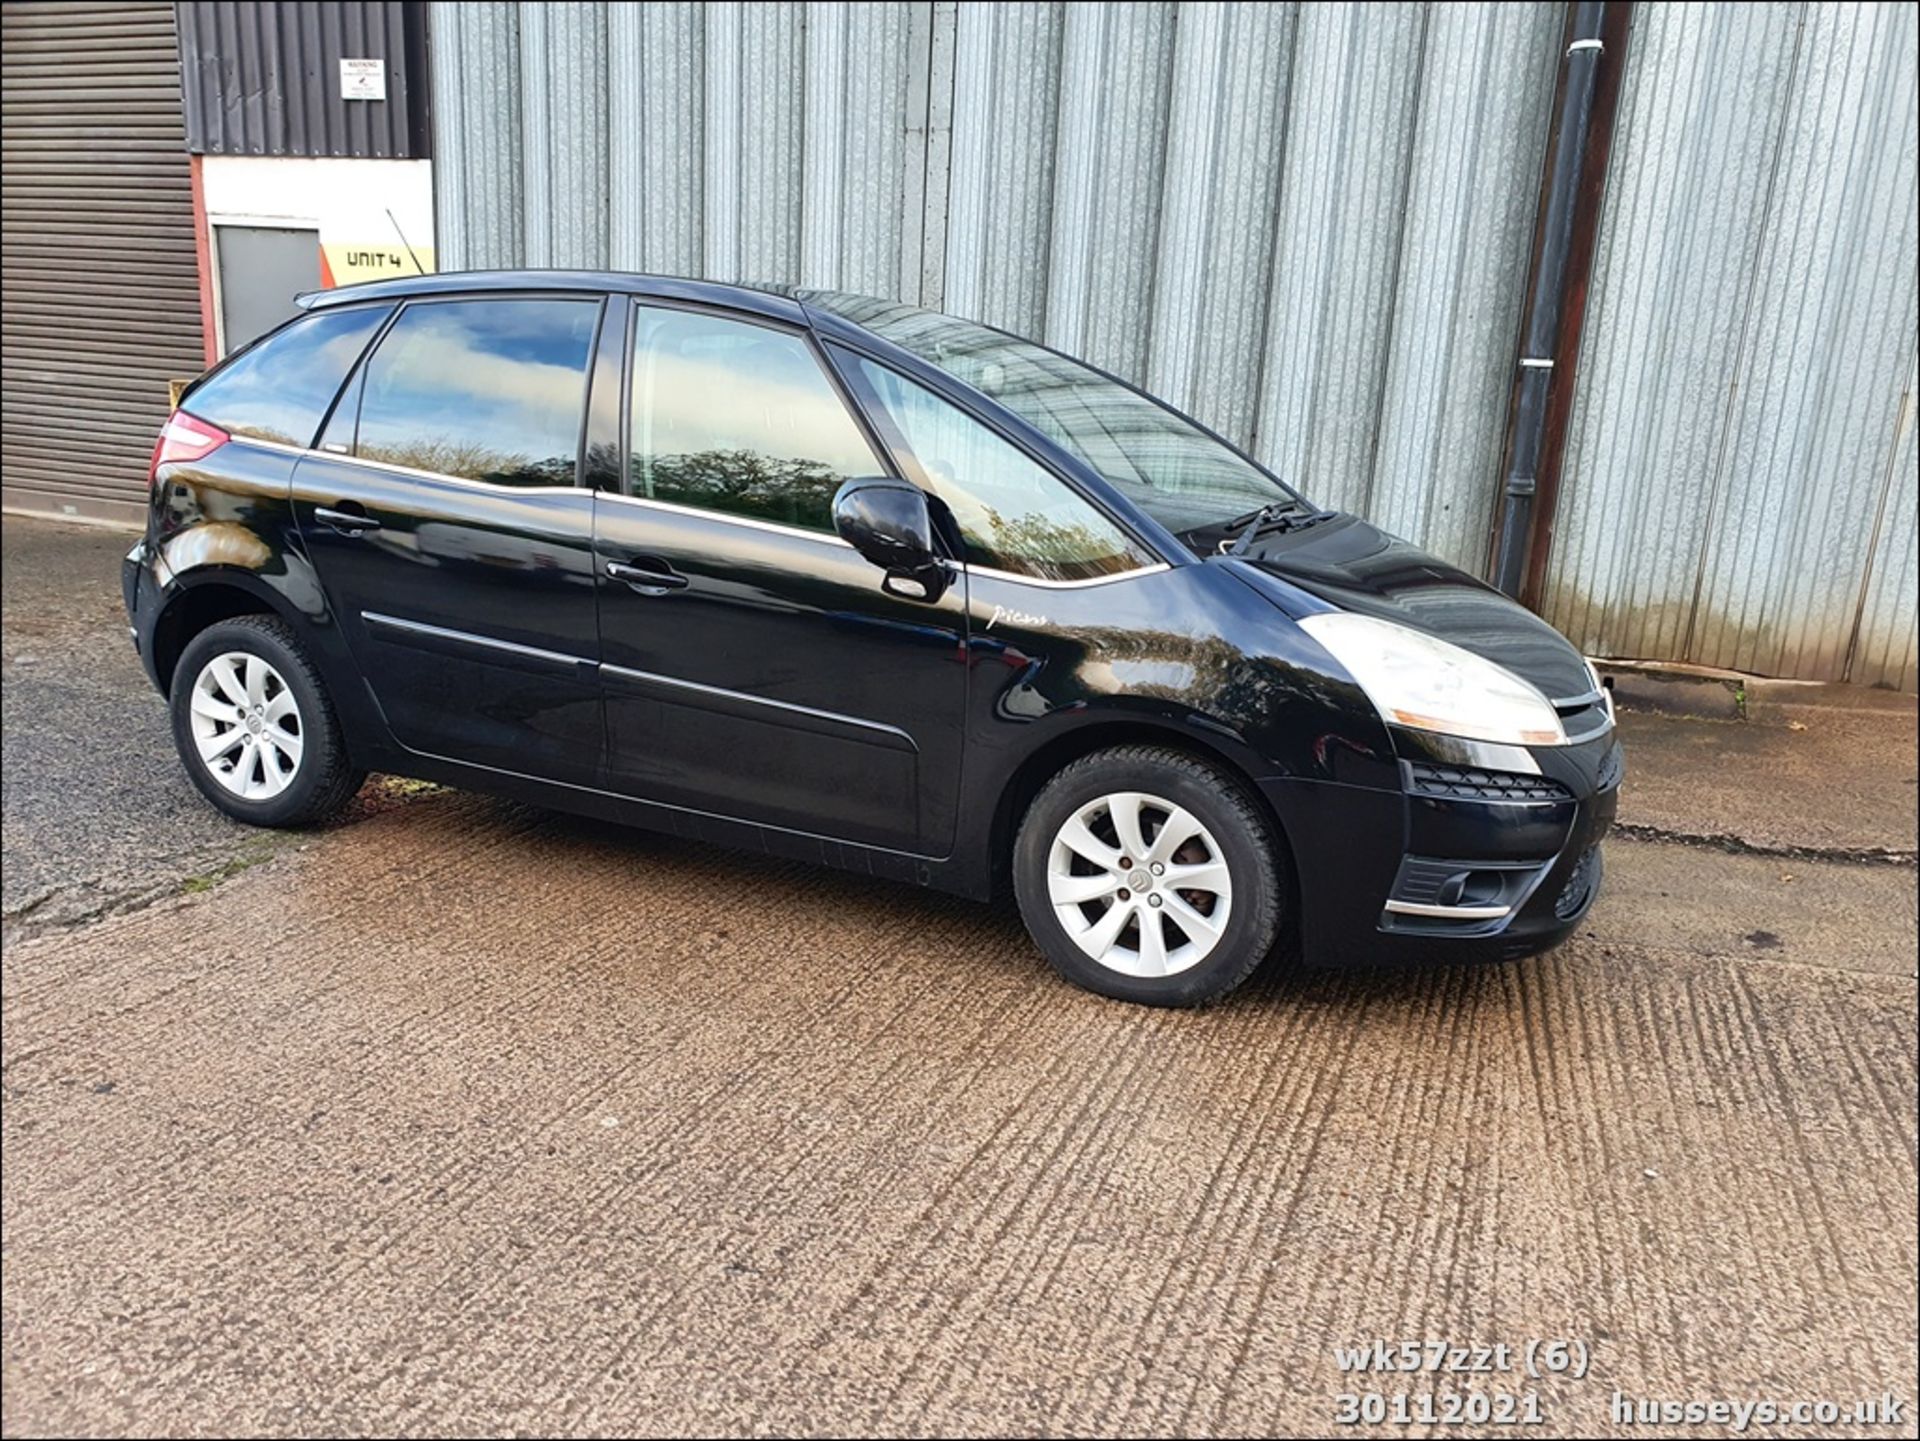 07/57 CITROEN C4 PICASSO 5 EXCL HDI EGS - 1560cc 5dr MPV (Black, 120k) - Image 6 of 29